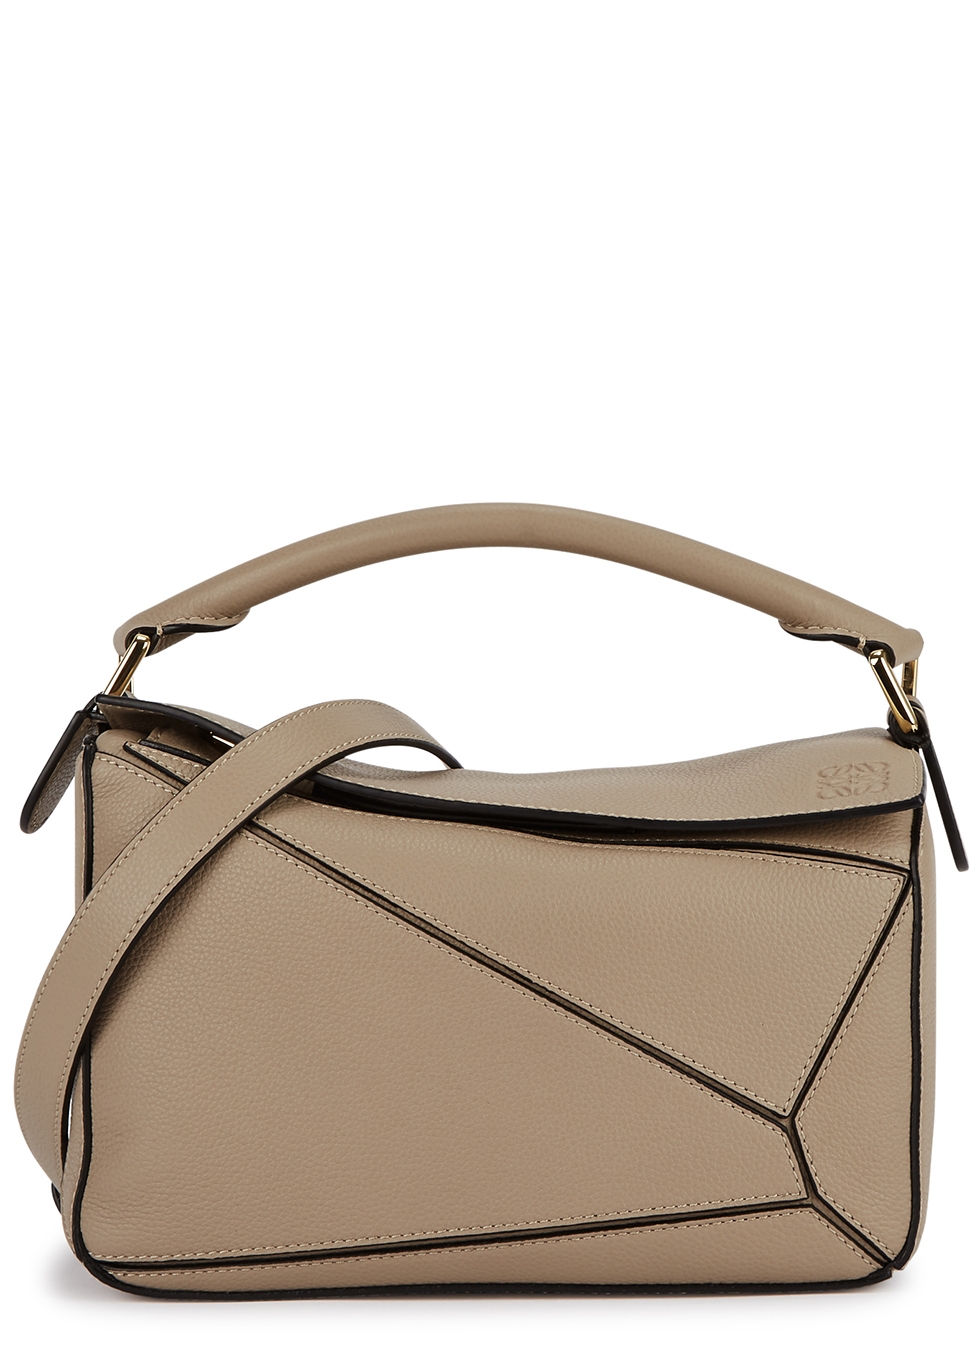 Loewe Puzzle small taupe leather cross-body bag - Harvey Nichols